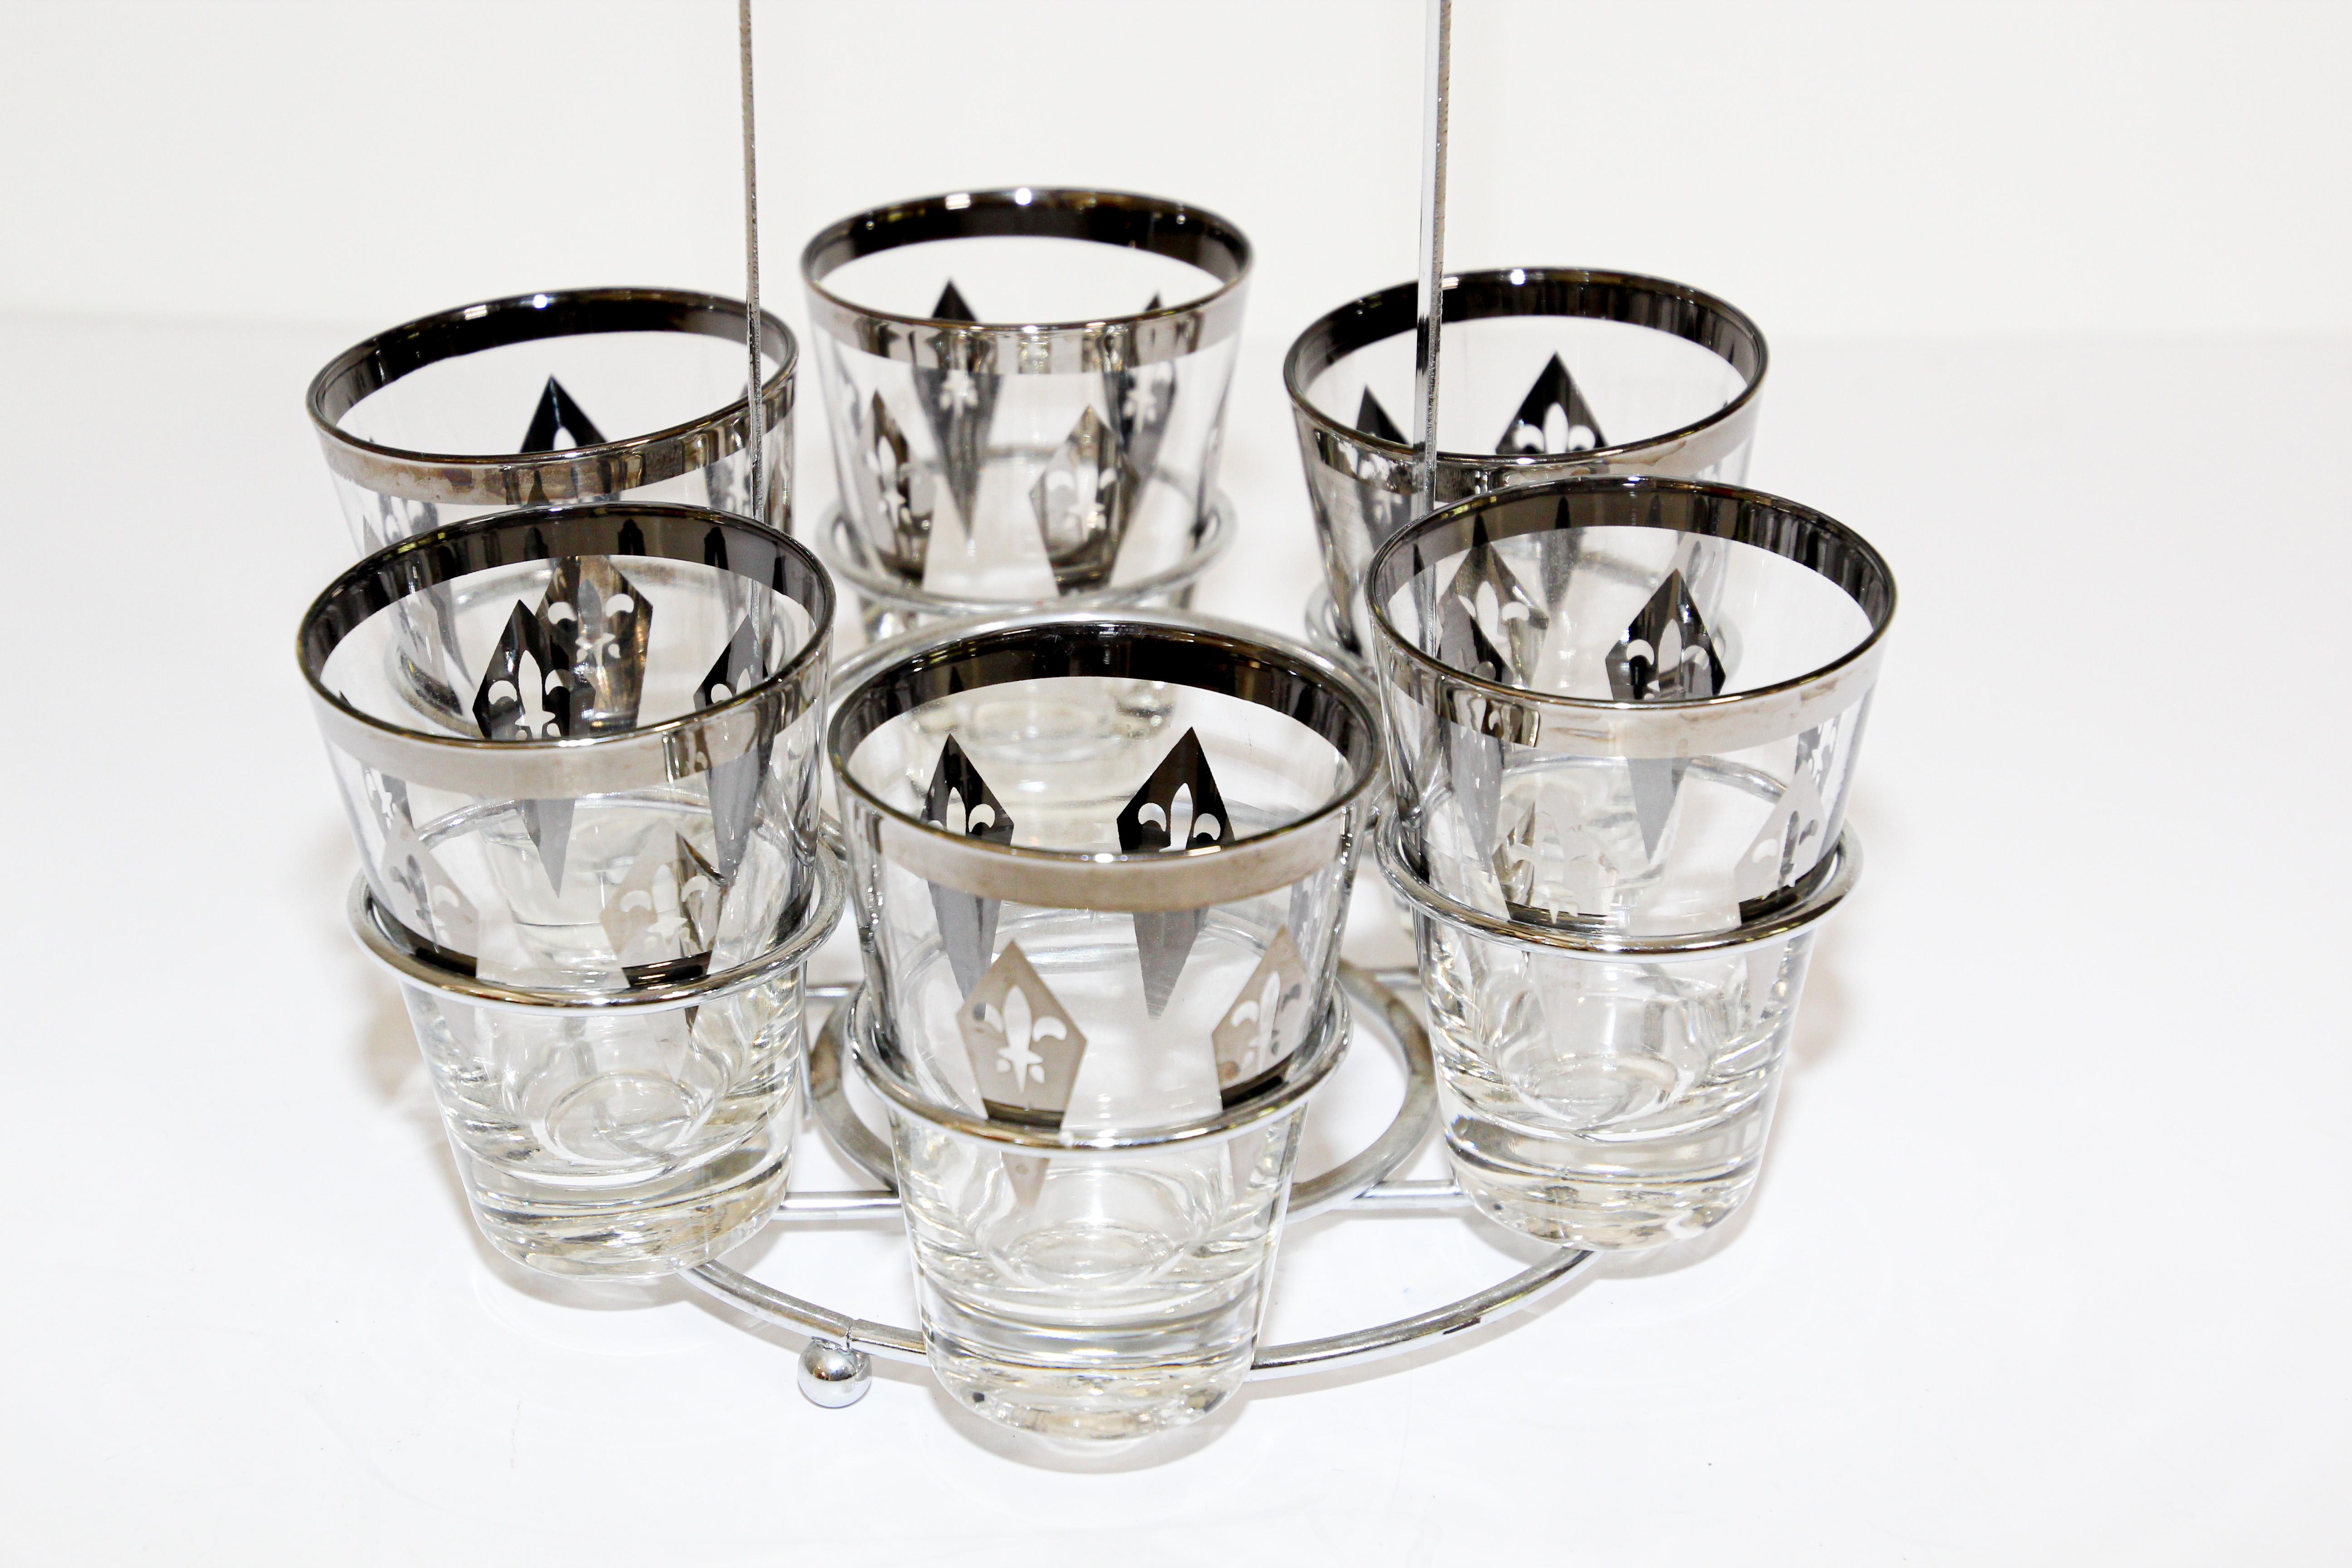 French Vintage Barware Set of Six Glasses with Silver Overlay in Carrier Caddy